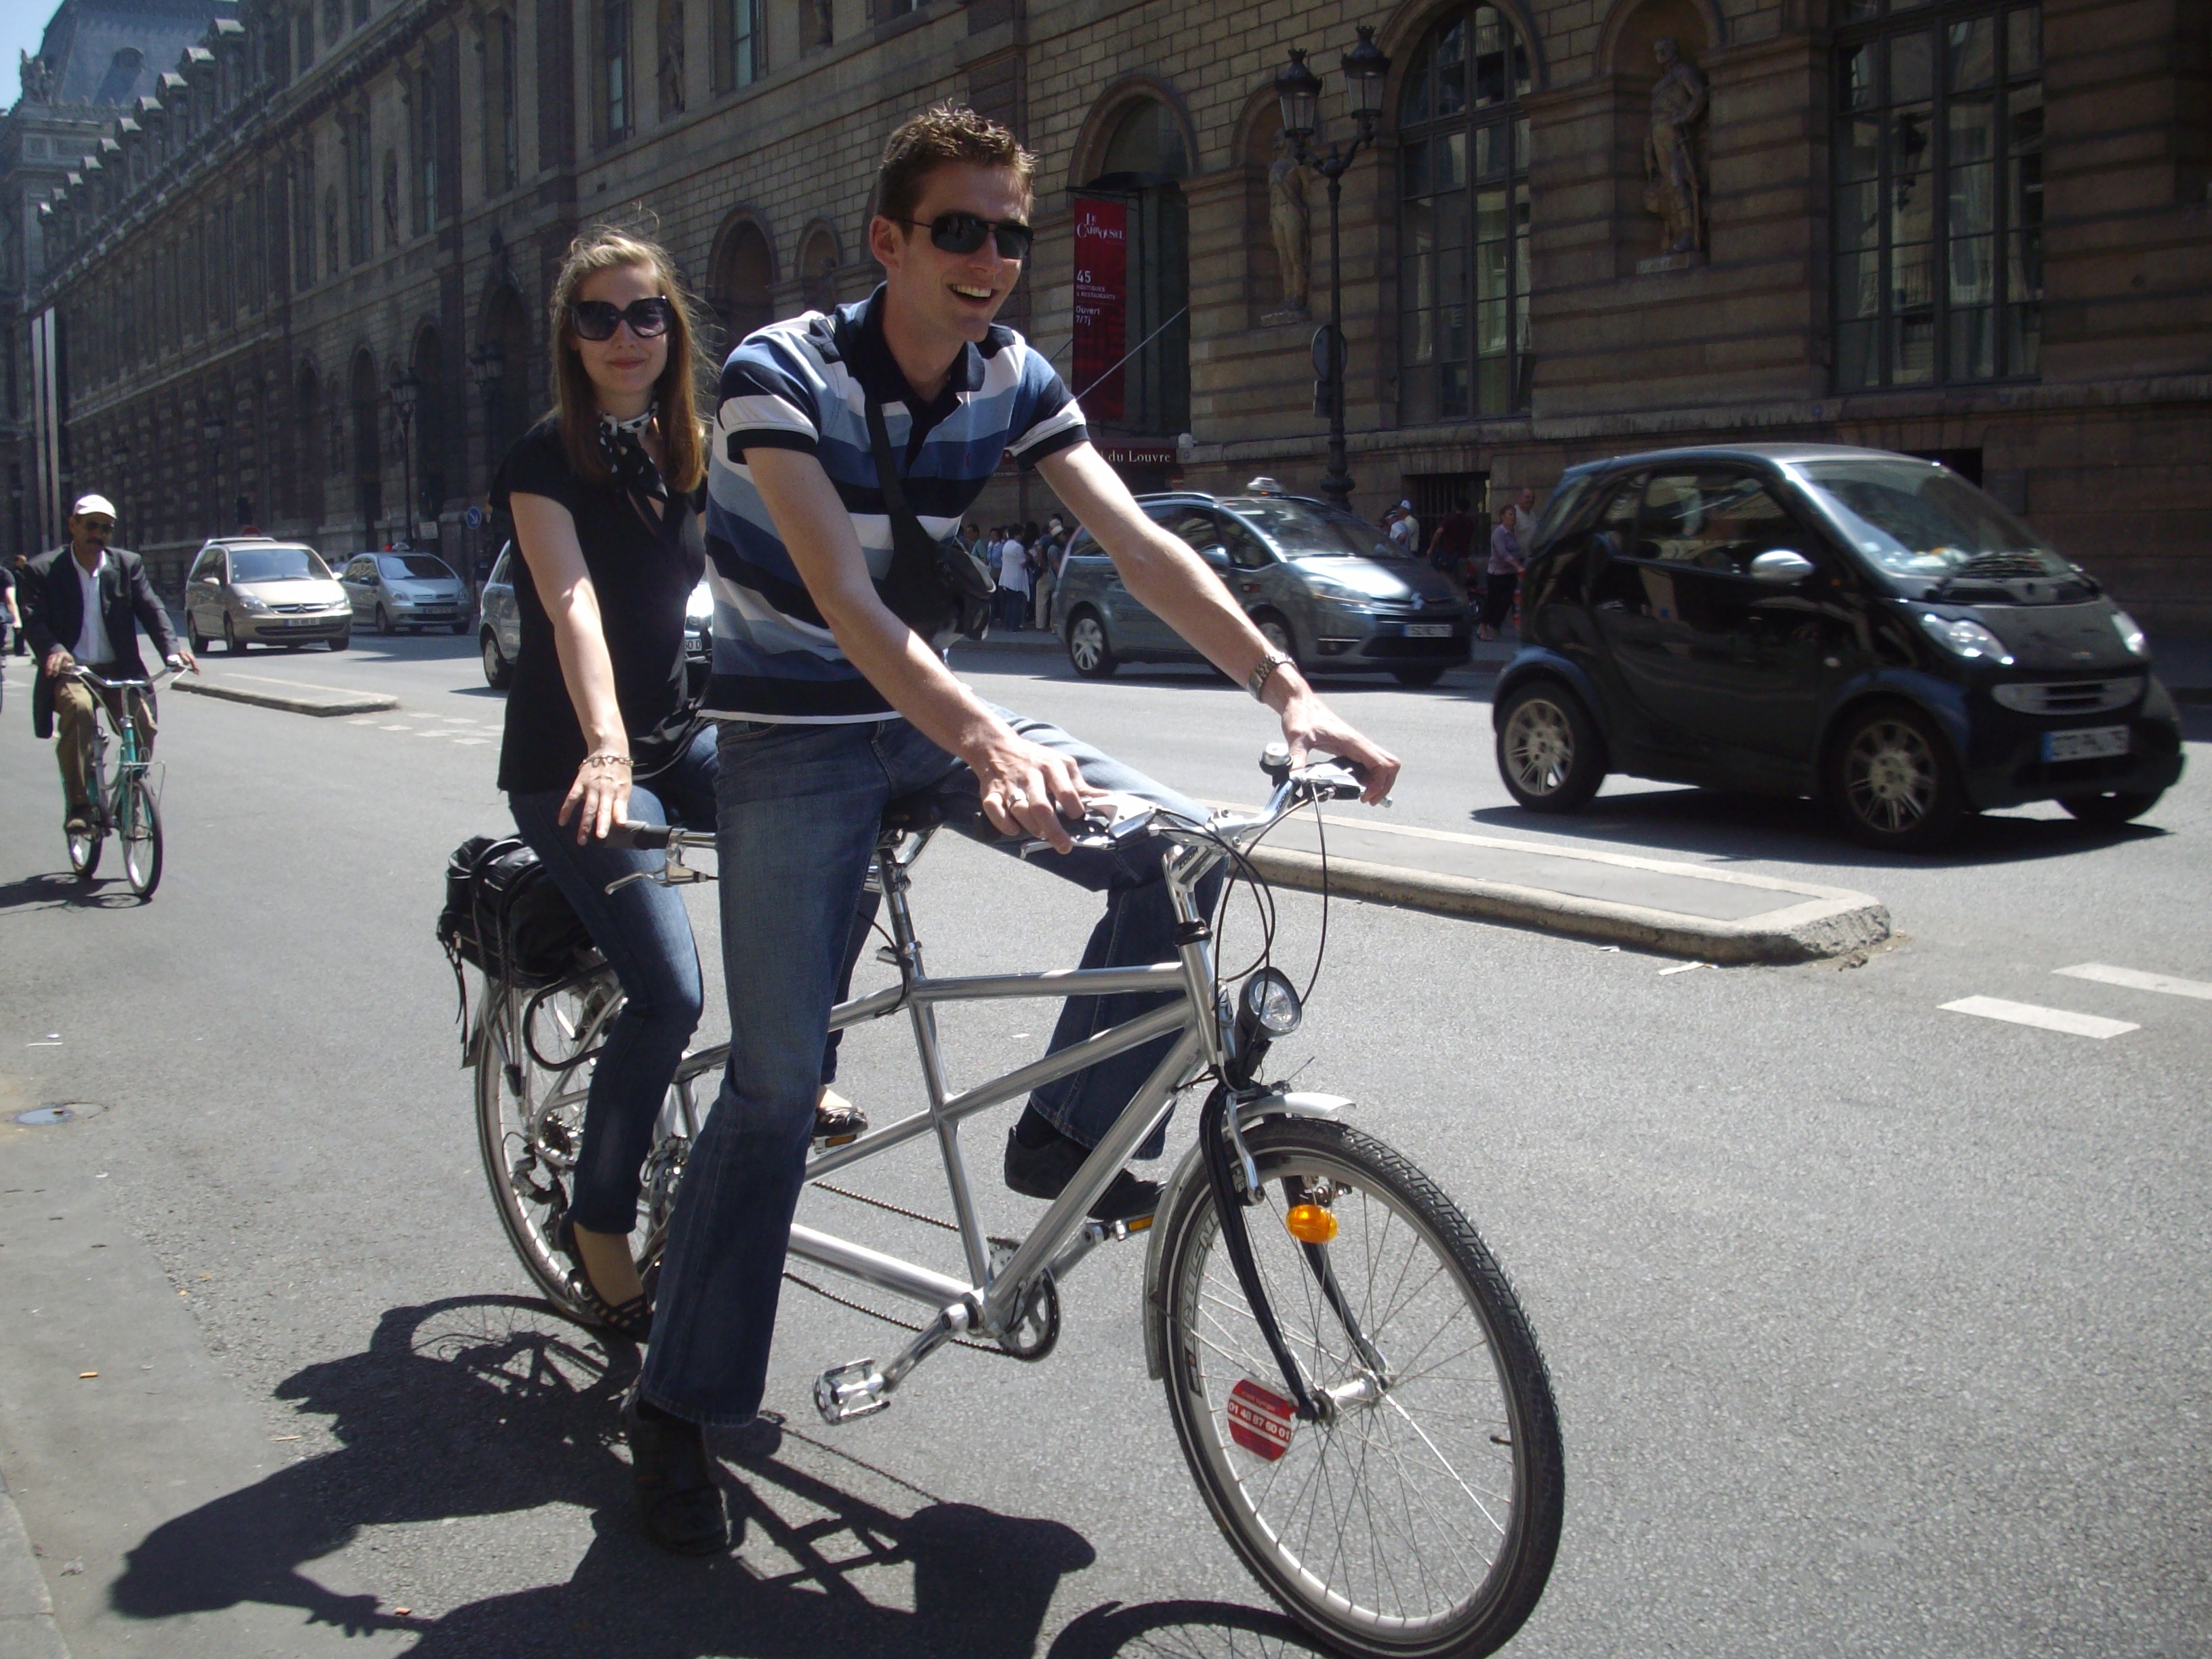 A couple bicycling on the streets of Paris near the Louvre Museum